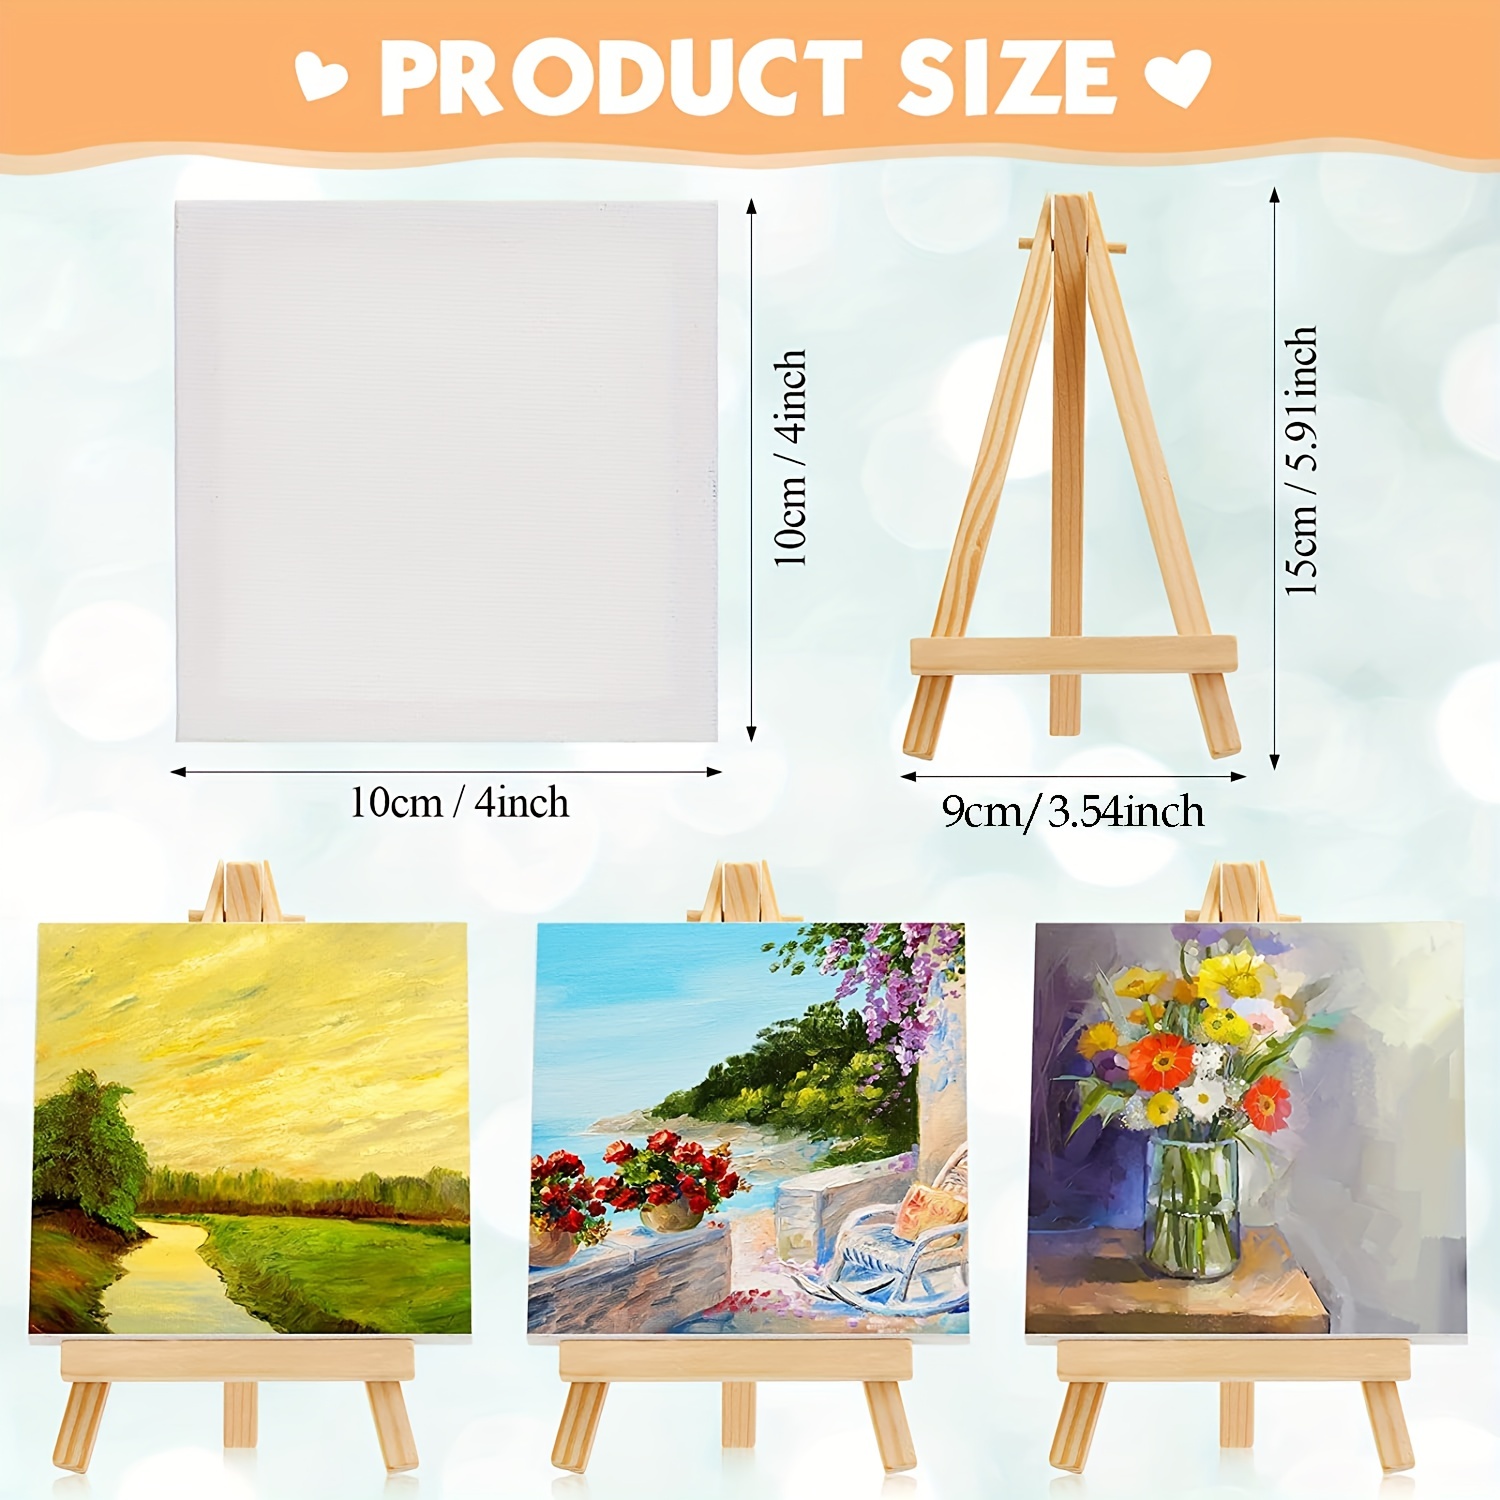 4 x 6 Stretched Canvas with 8 Mini Wood Display Easel Kit, 12 Pack - Artist  Tabletop Stand, 4” x 6” - 8” Easel - Harris Teeter